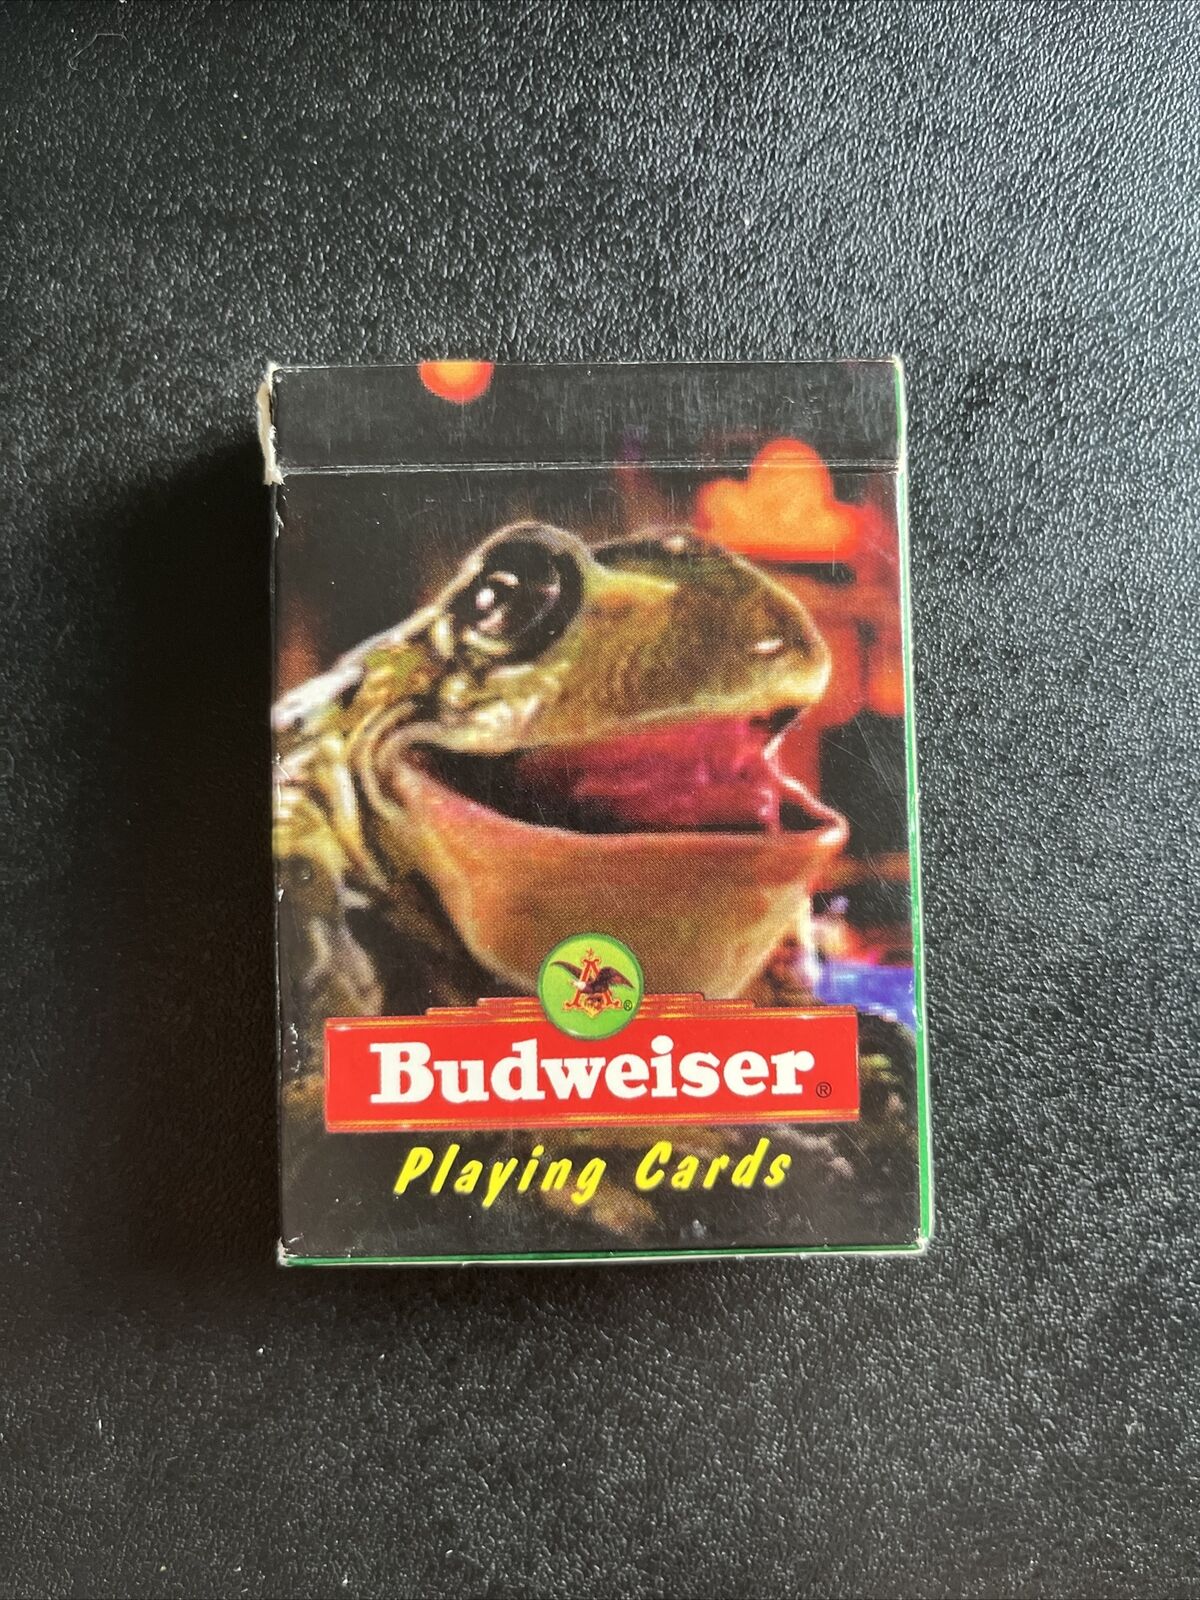 Budweiser Frog Deck Playing Cards Vintage 1996 Anheuser-Busch Advertising